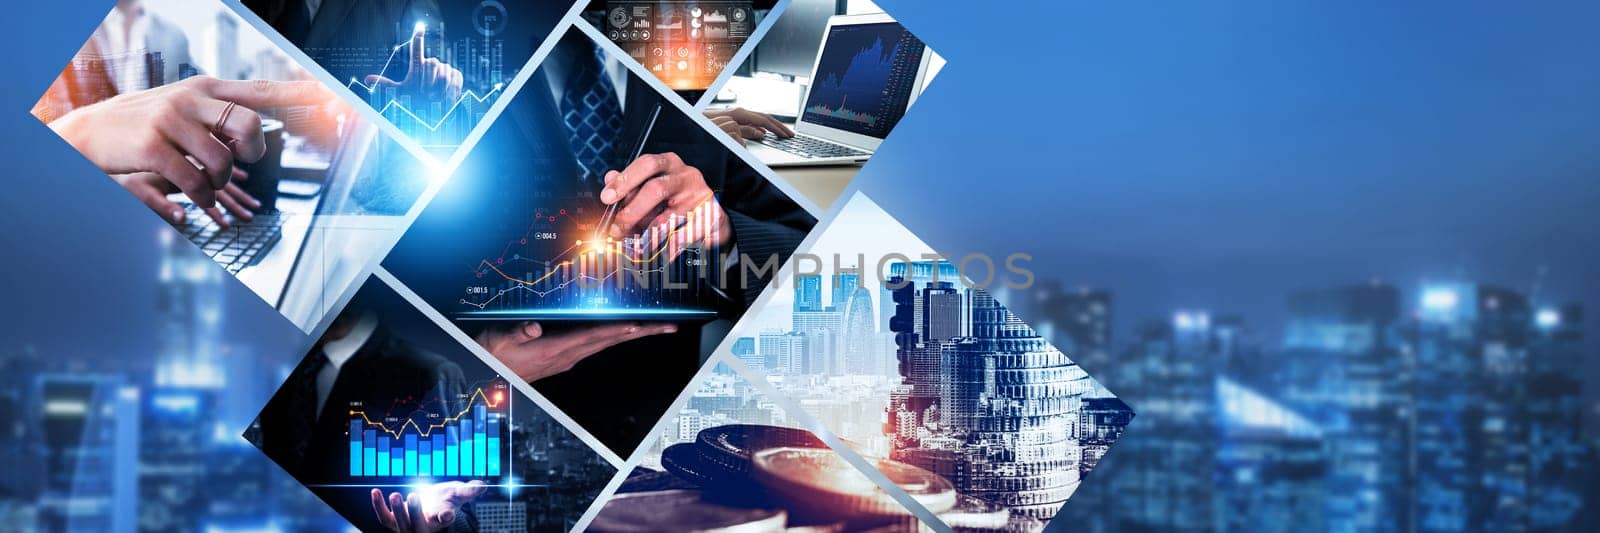 Futuristic business digital financial data technology and big data kudos concept by biancoblue